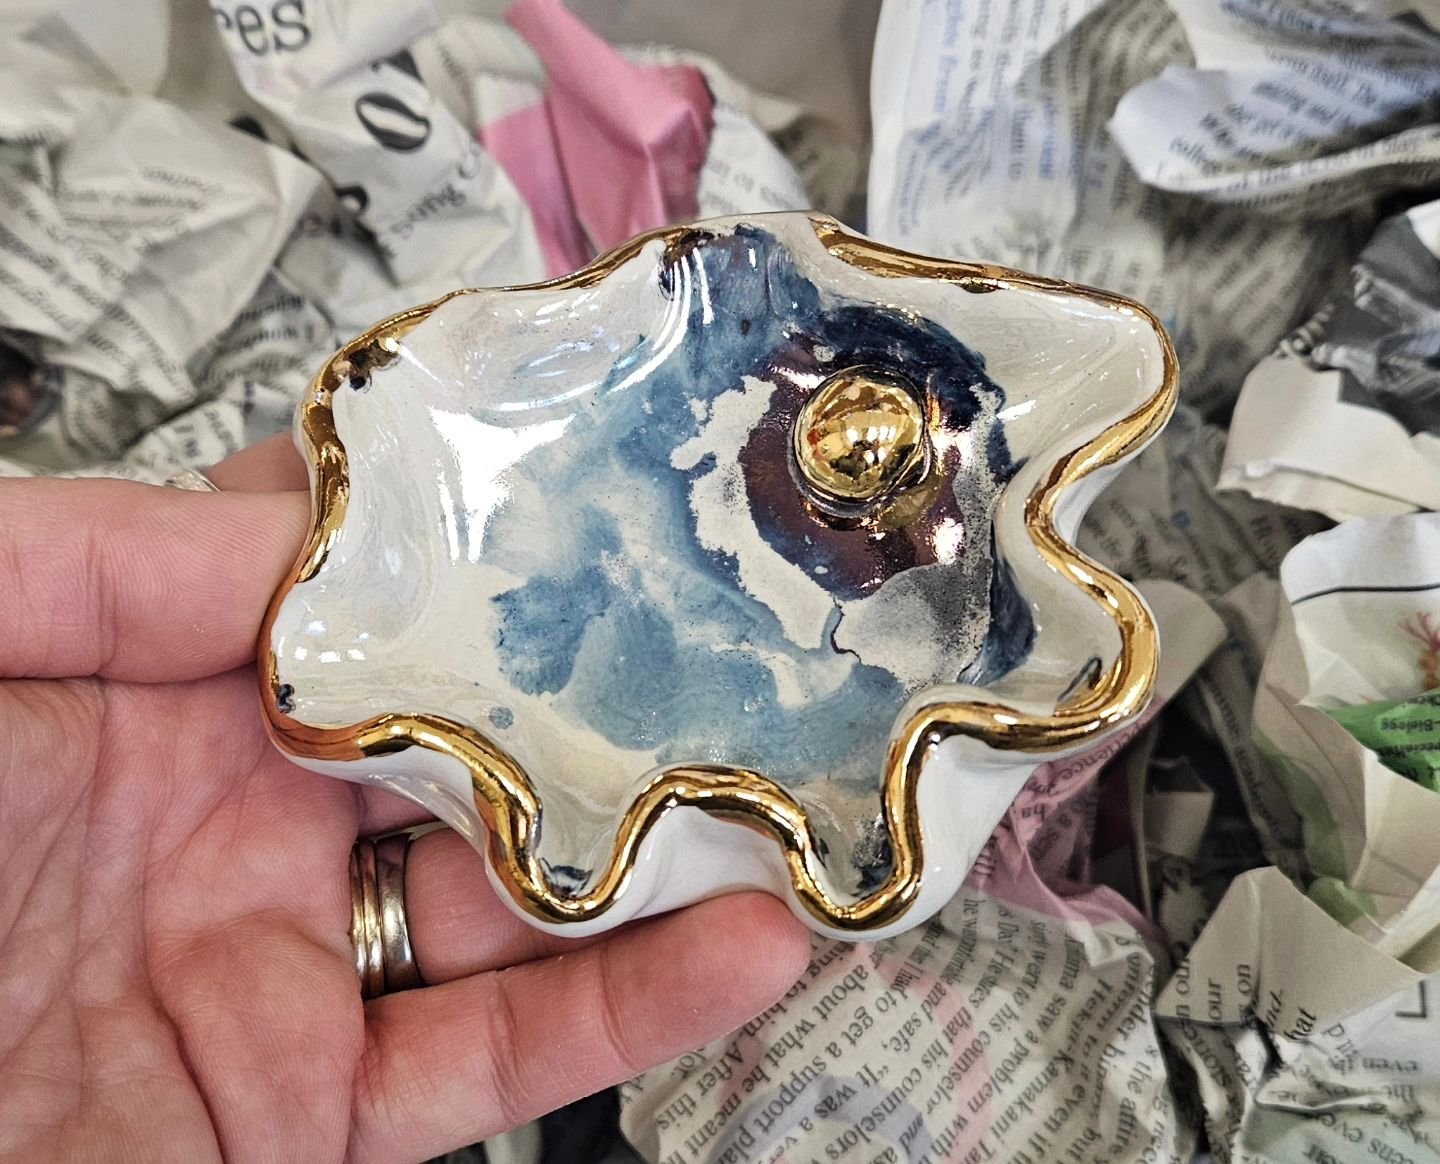 New oyster shell trinket dishes! My first time playing with opal and mother of pearl glazes, and I love them! I sealed them with a bit of resin so they look wet, as if they were fresh caught out of the sea. Perfect to put your tiny treasures. Pick on